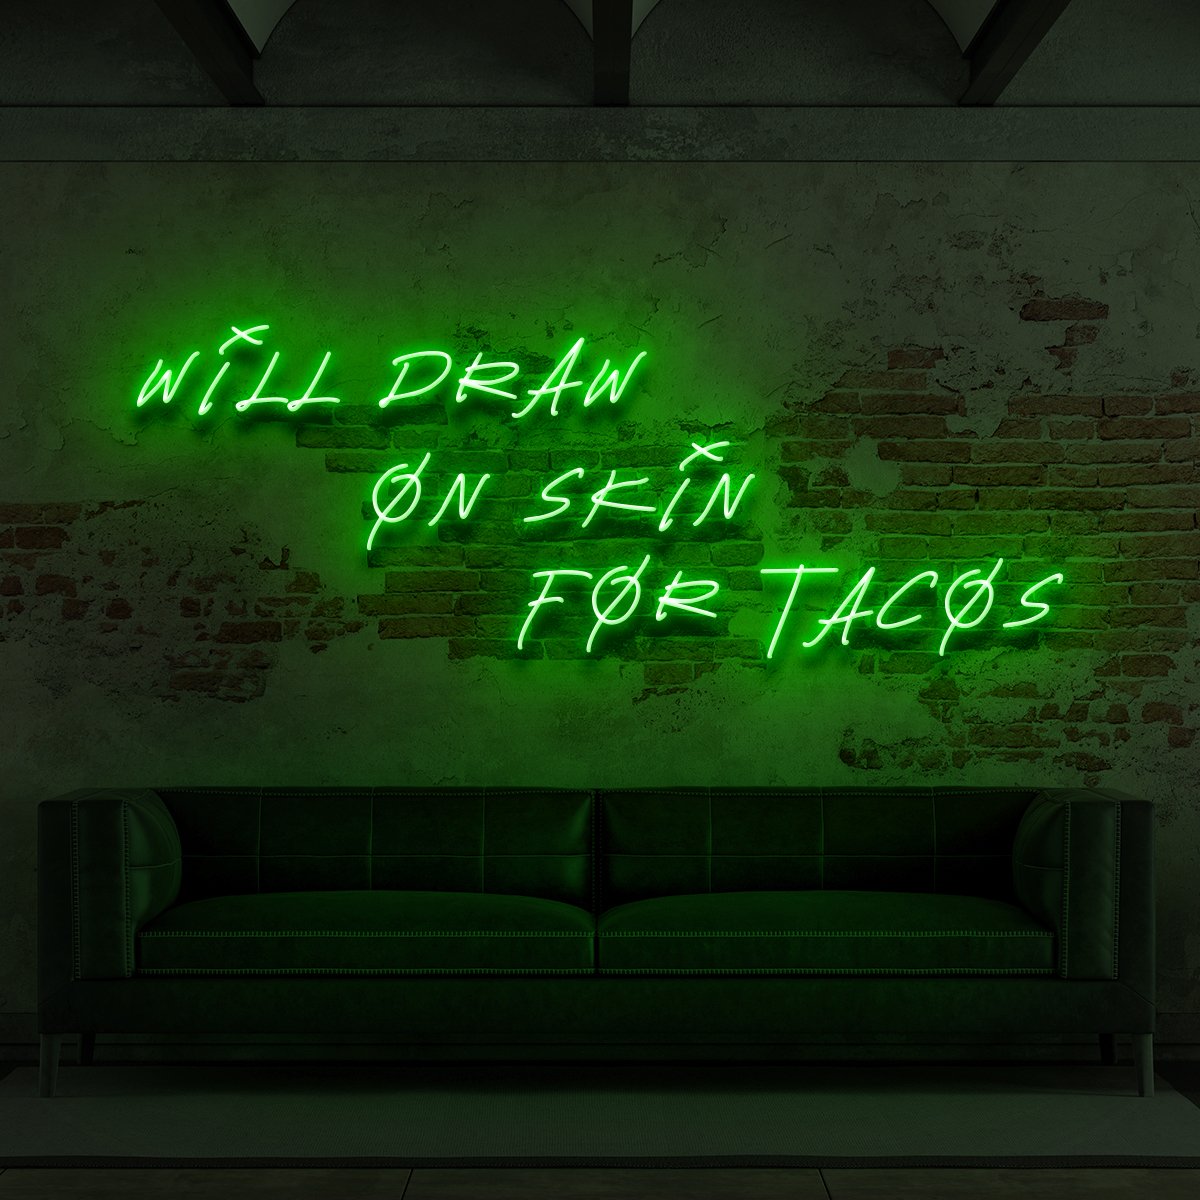 "Will Draw On Skin For Tacos" Neon Sign for Tattoo Parlours 90cm (3ft) / Green / LED Neon by Neon Icons